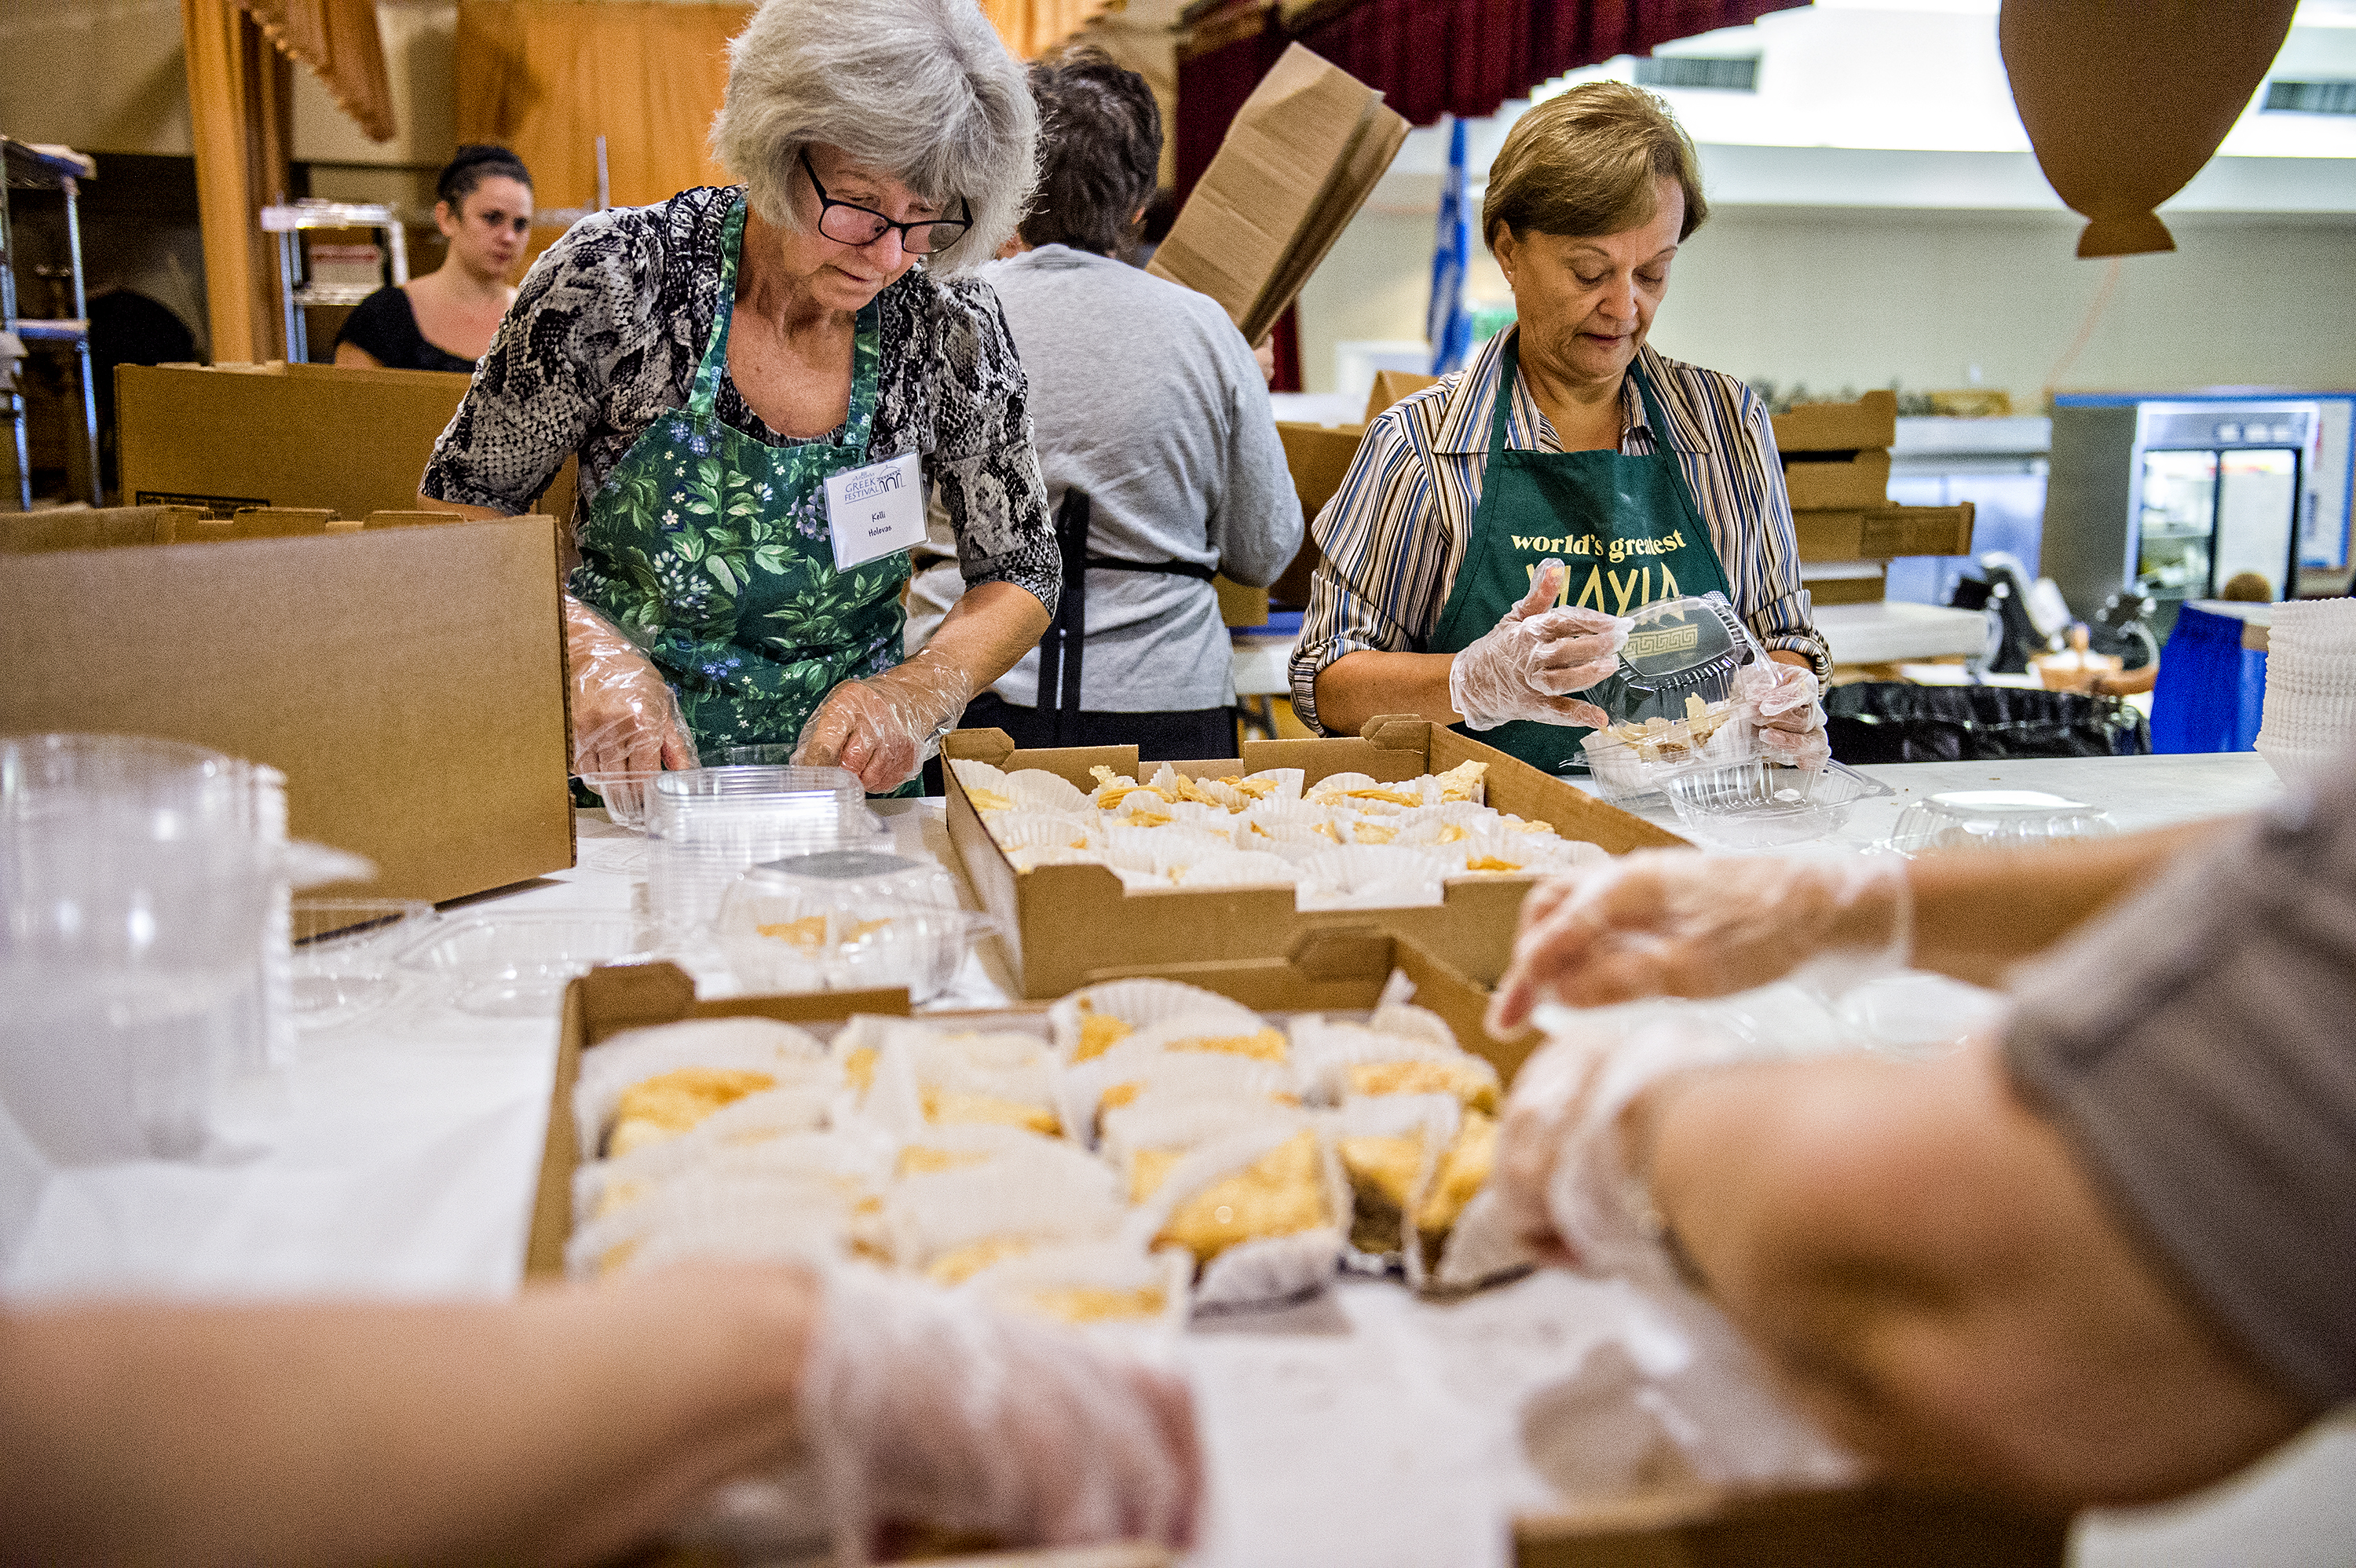 Kelli Holevas (left) and Amy Lekos fill pastry orders as they stuff containers with baklava during the Atlanta Greek Festival at the Greek Orthodox Cathedral of Annunciation on Saturday, September 26, 2015.